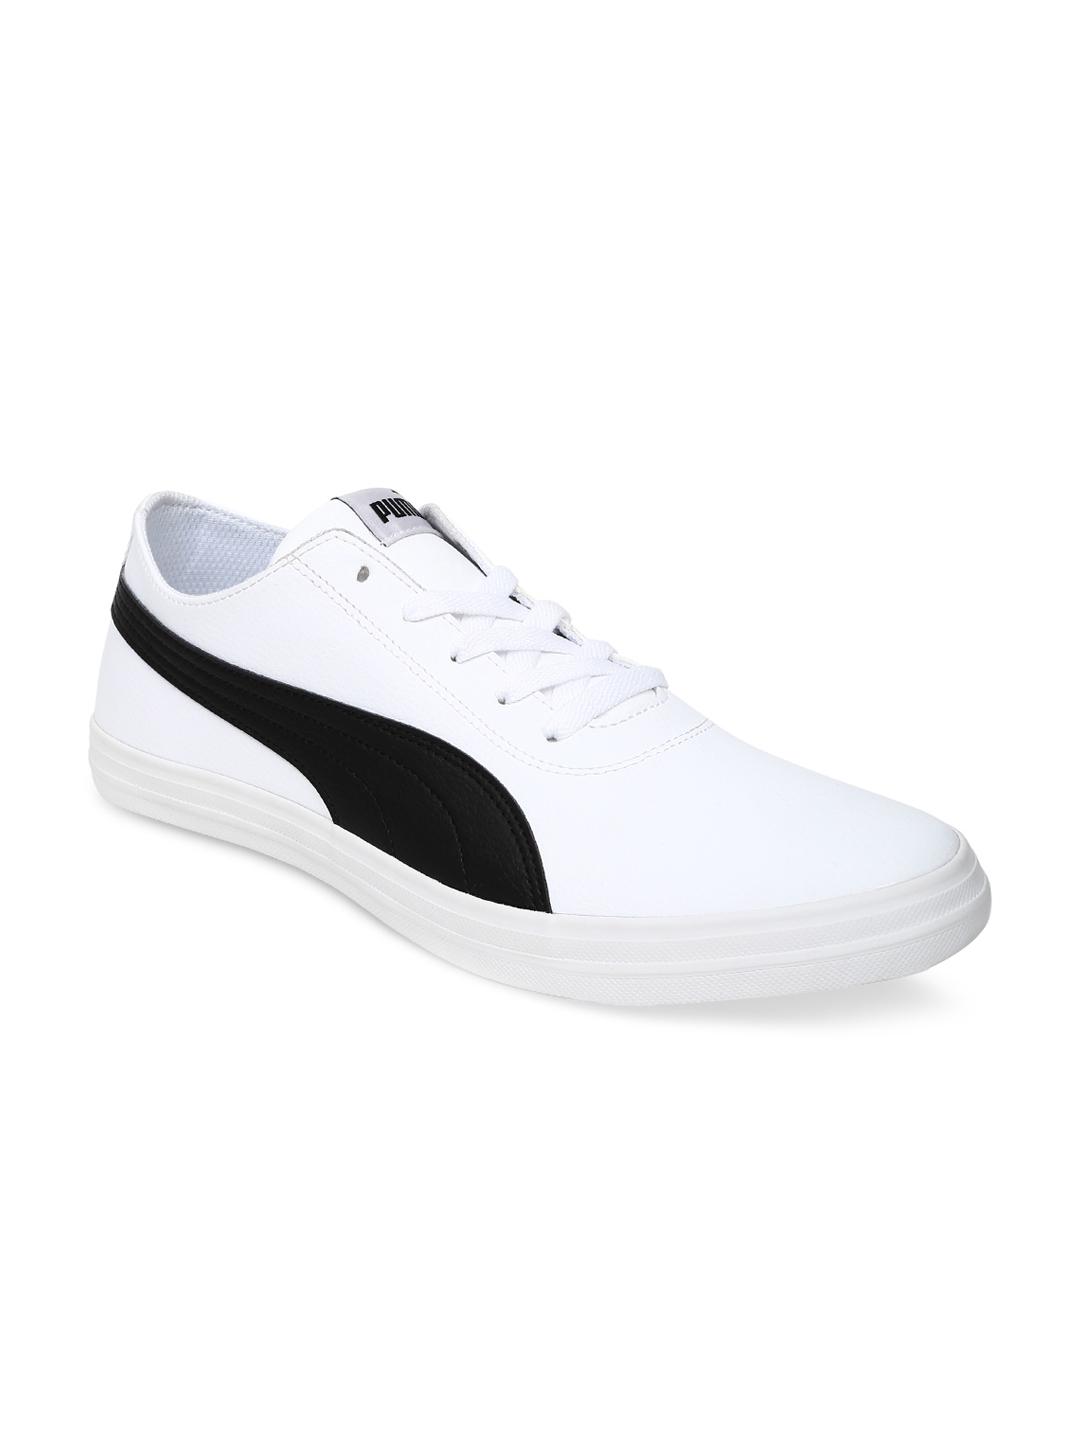 Buy Puma Unisex Urban SL White Sneakers - Casual Shoes for Unisex 6774491 |  Myntra